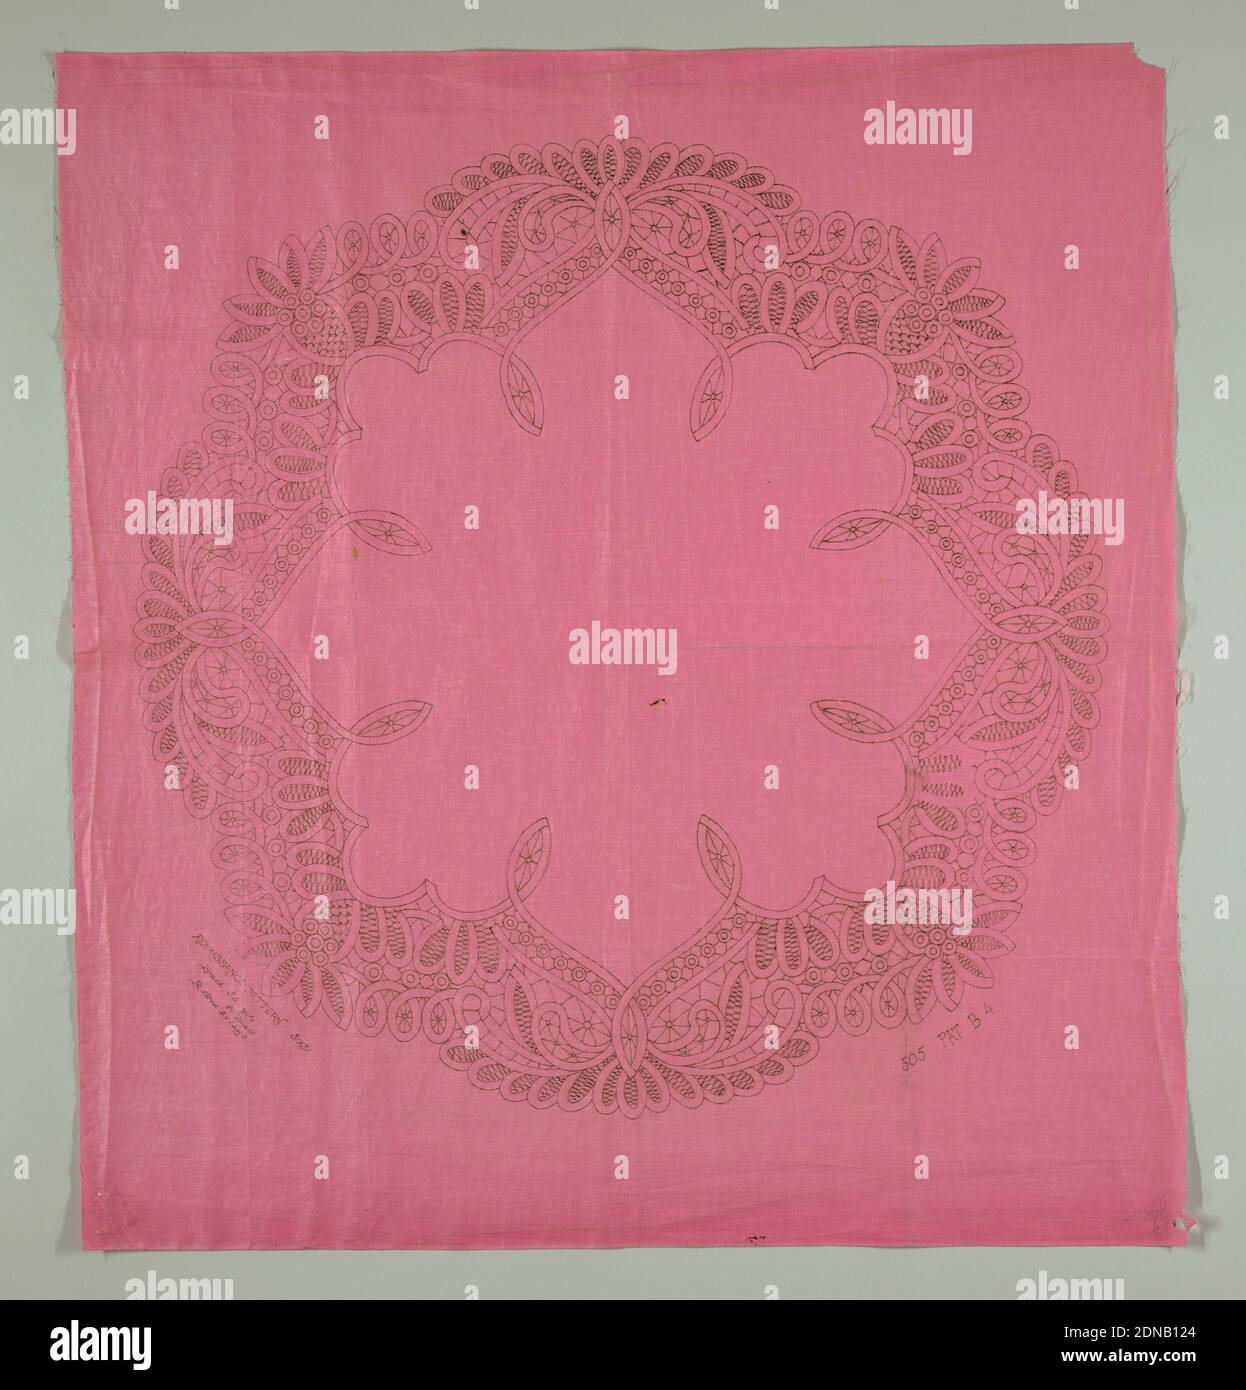 Lace pattern, Medium: cotton Technique: plain weave fabric printed with pattern for machine made tape lace, Printed lace pattern for machine premade tape lace., Printed in black on pink fabric: Renaissance Pattern 31 x 31, Braid 32 yards, Buttons 84 small, 24 large, 505 PAT. B4, USA, ca. 1905, lace, Lace pattern Stock Photo